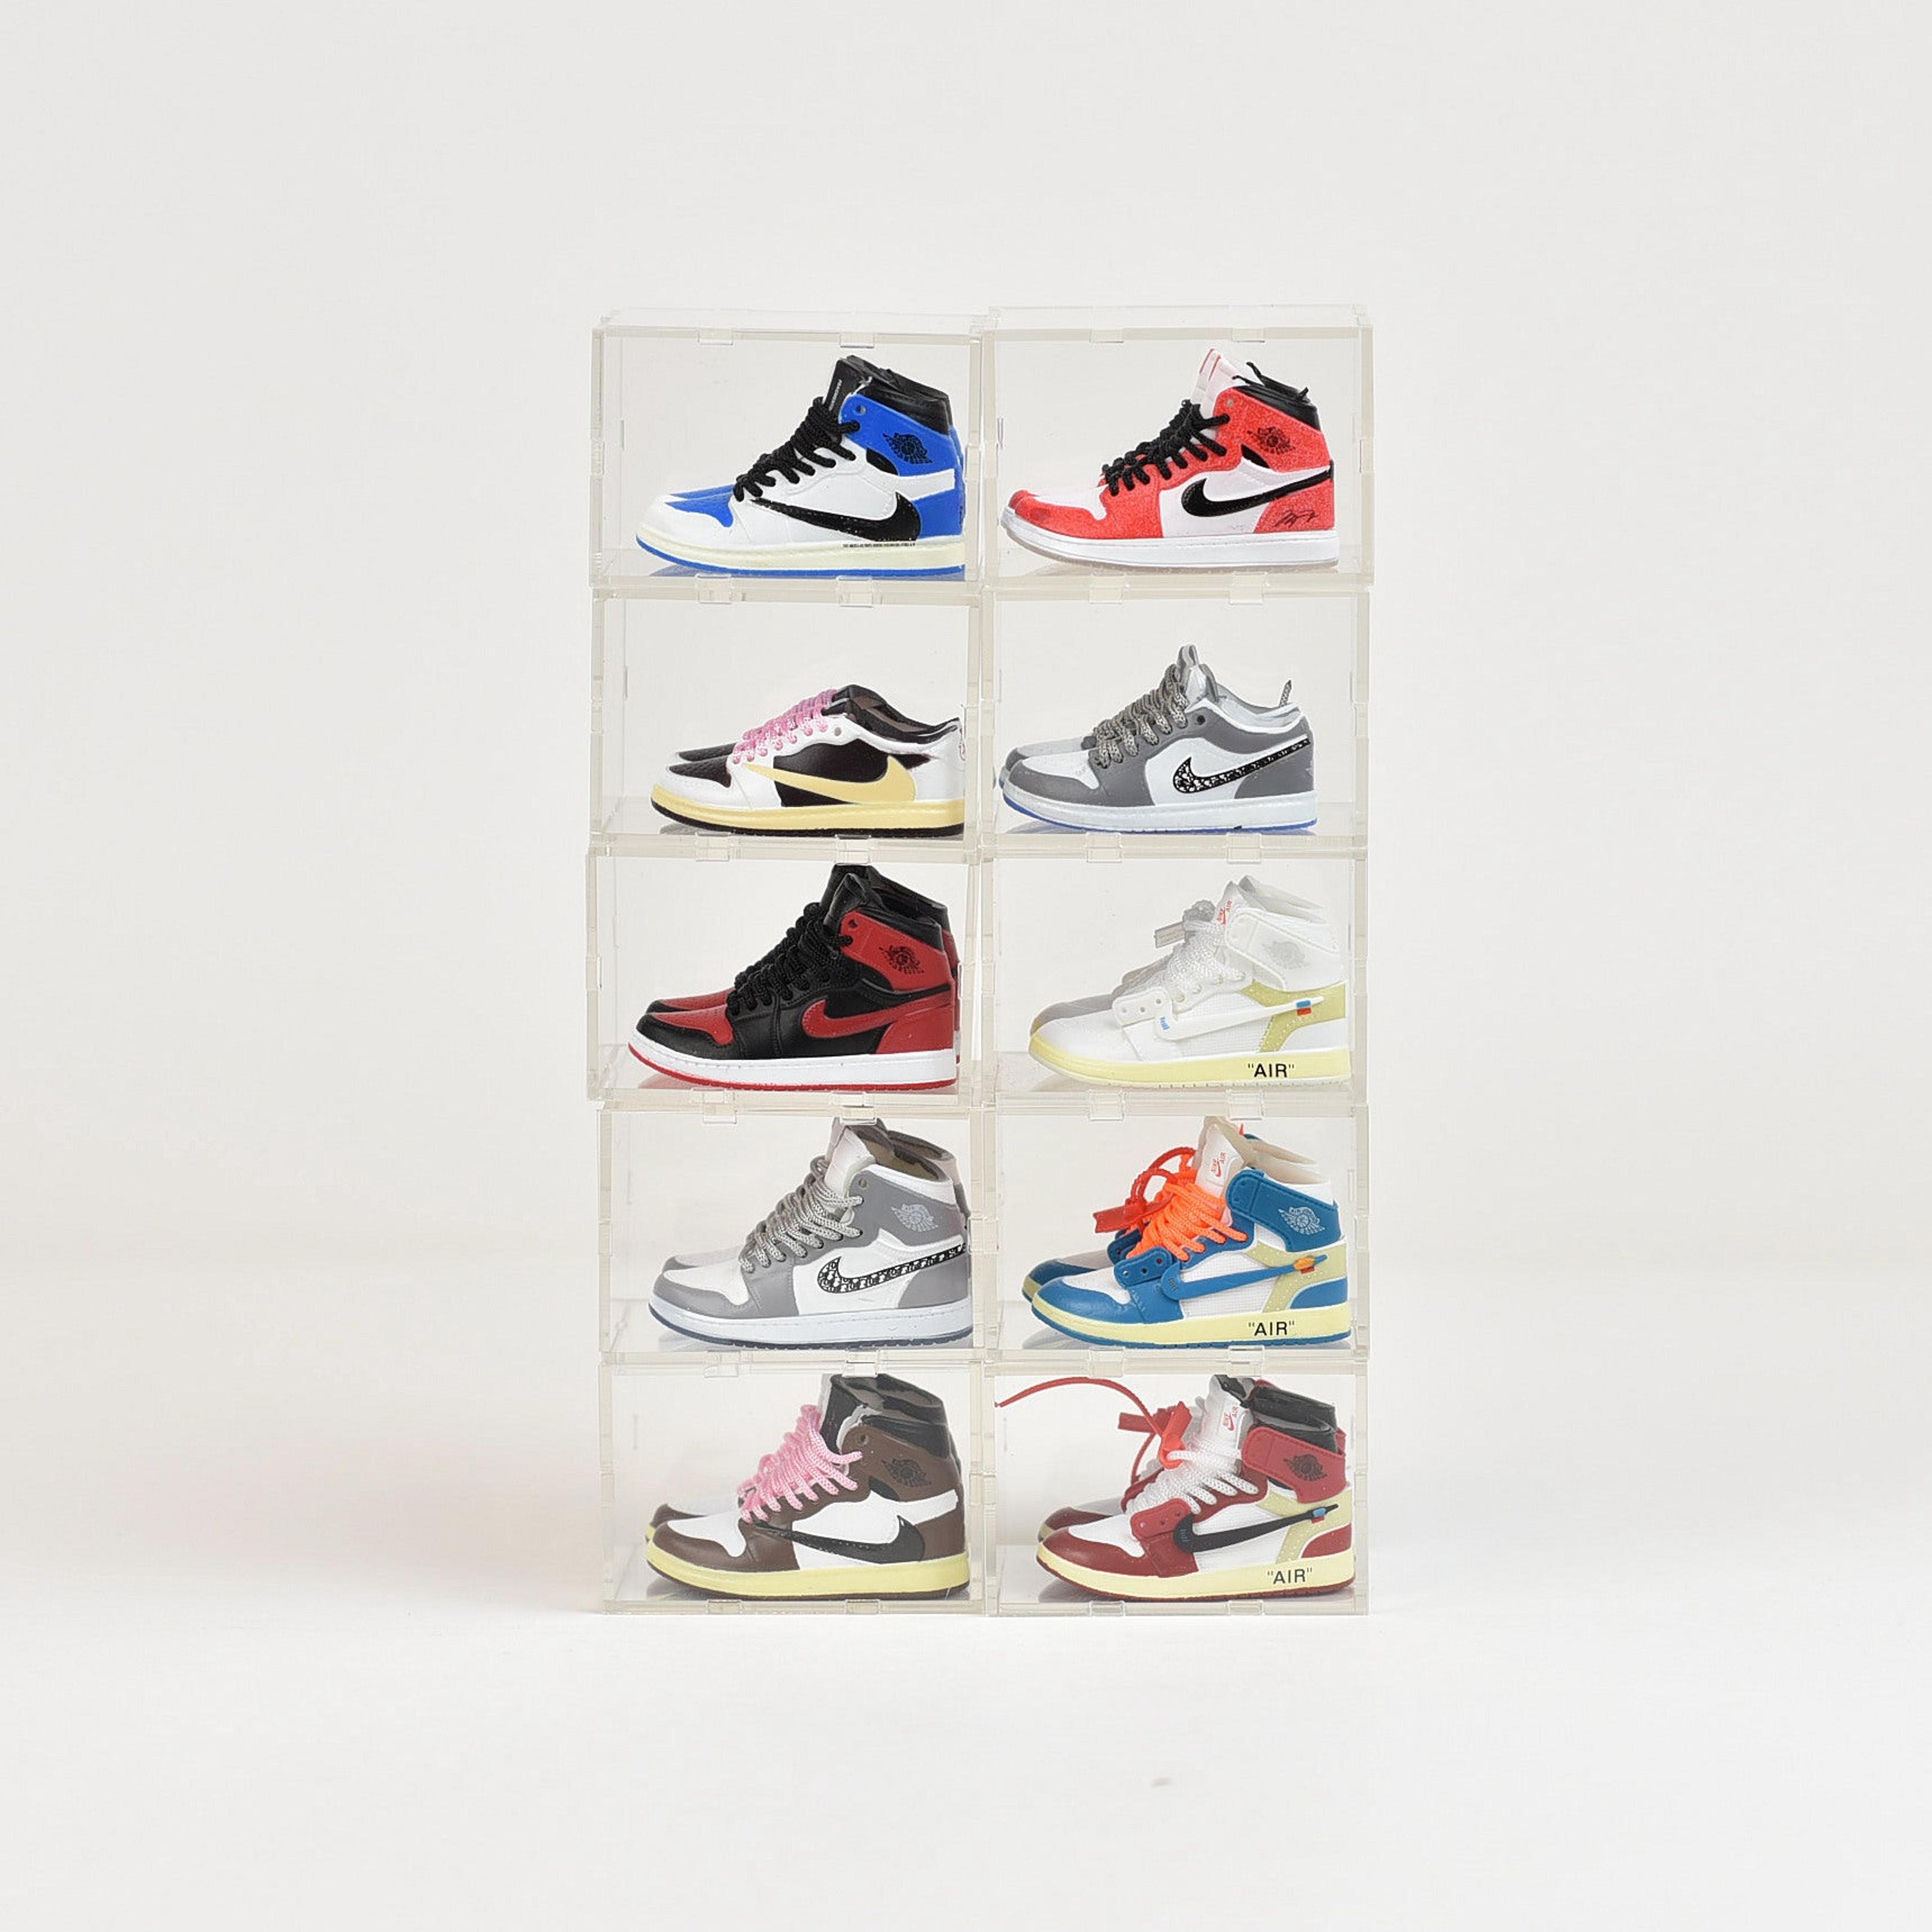 Alternate View 45 of AJ1 Mini Sneakers Collection with Display Case